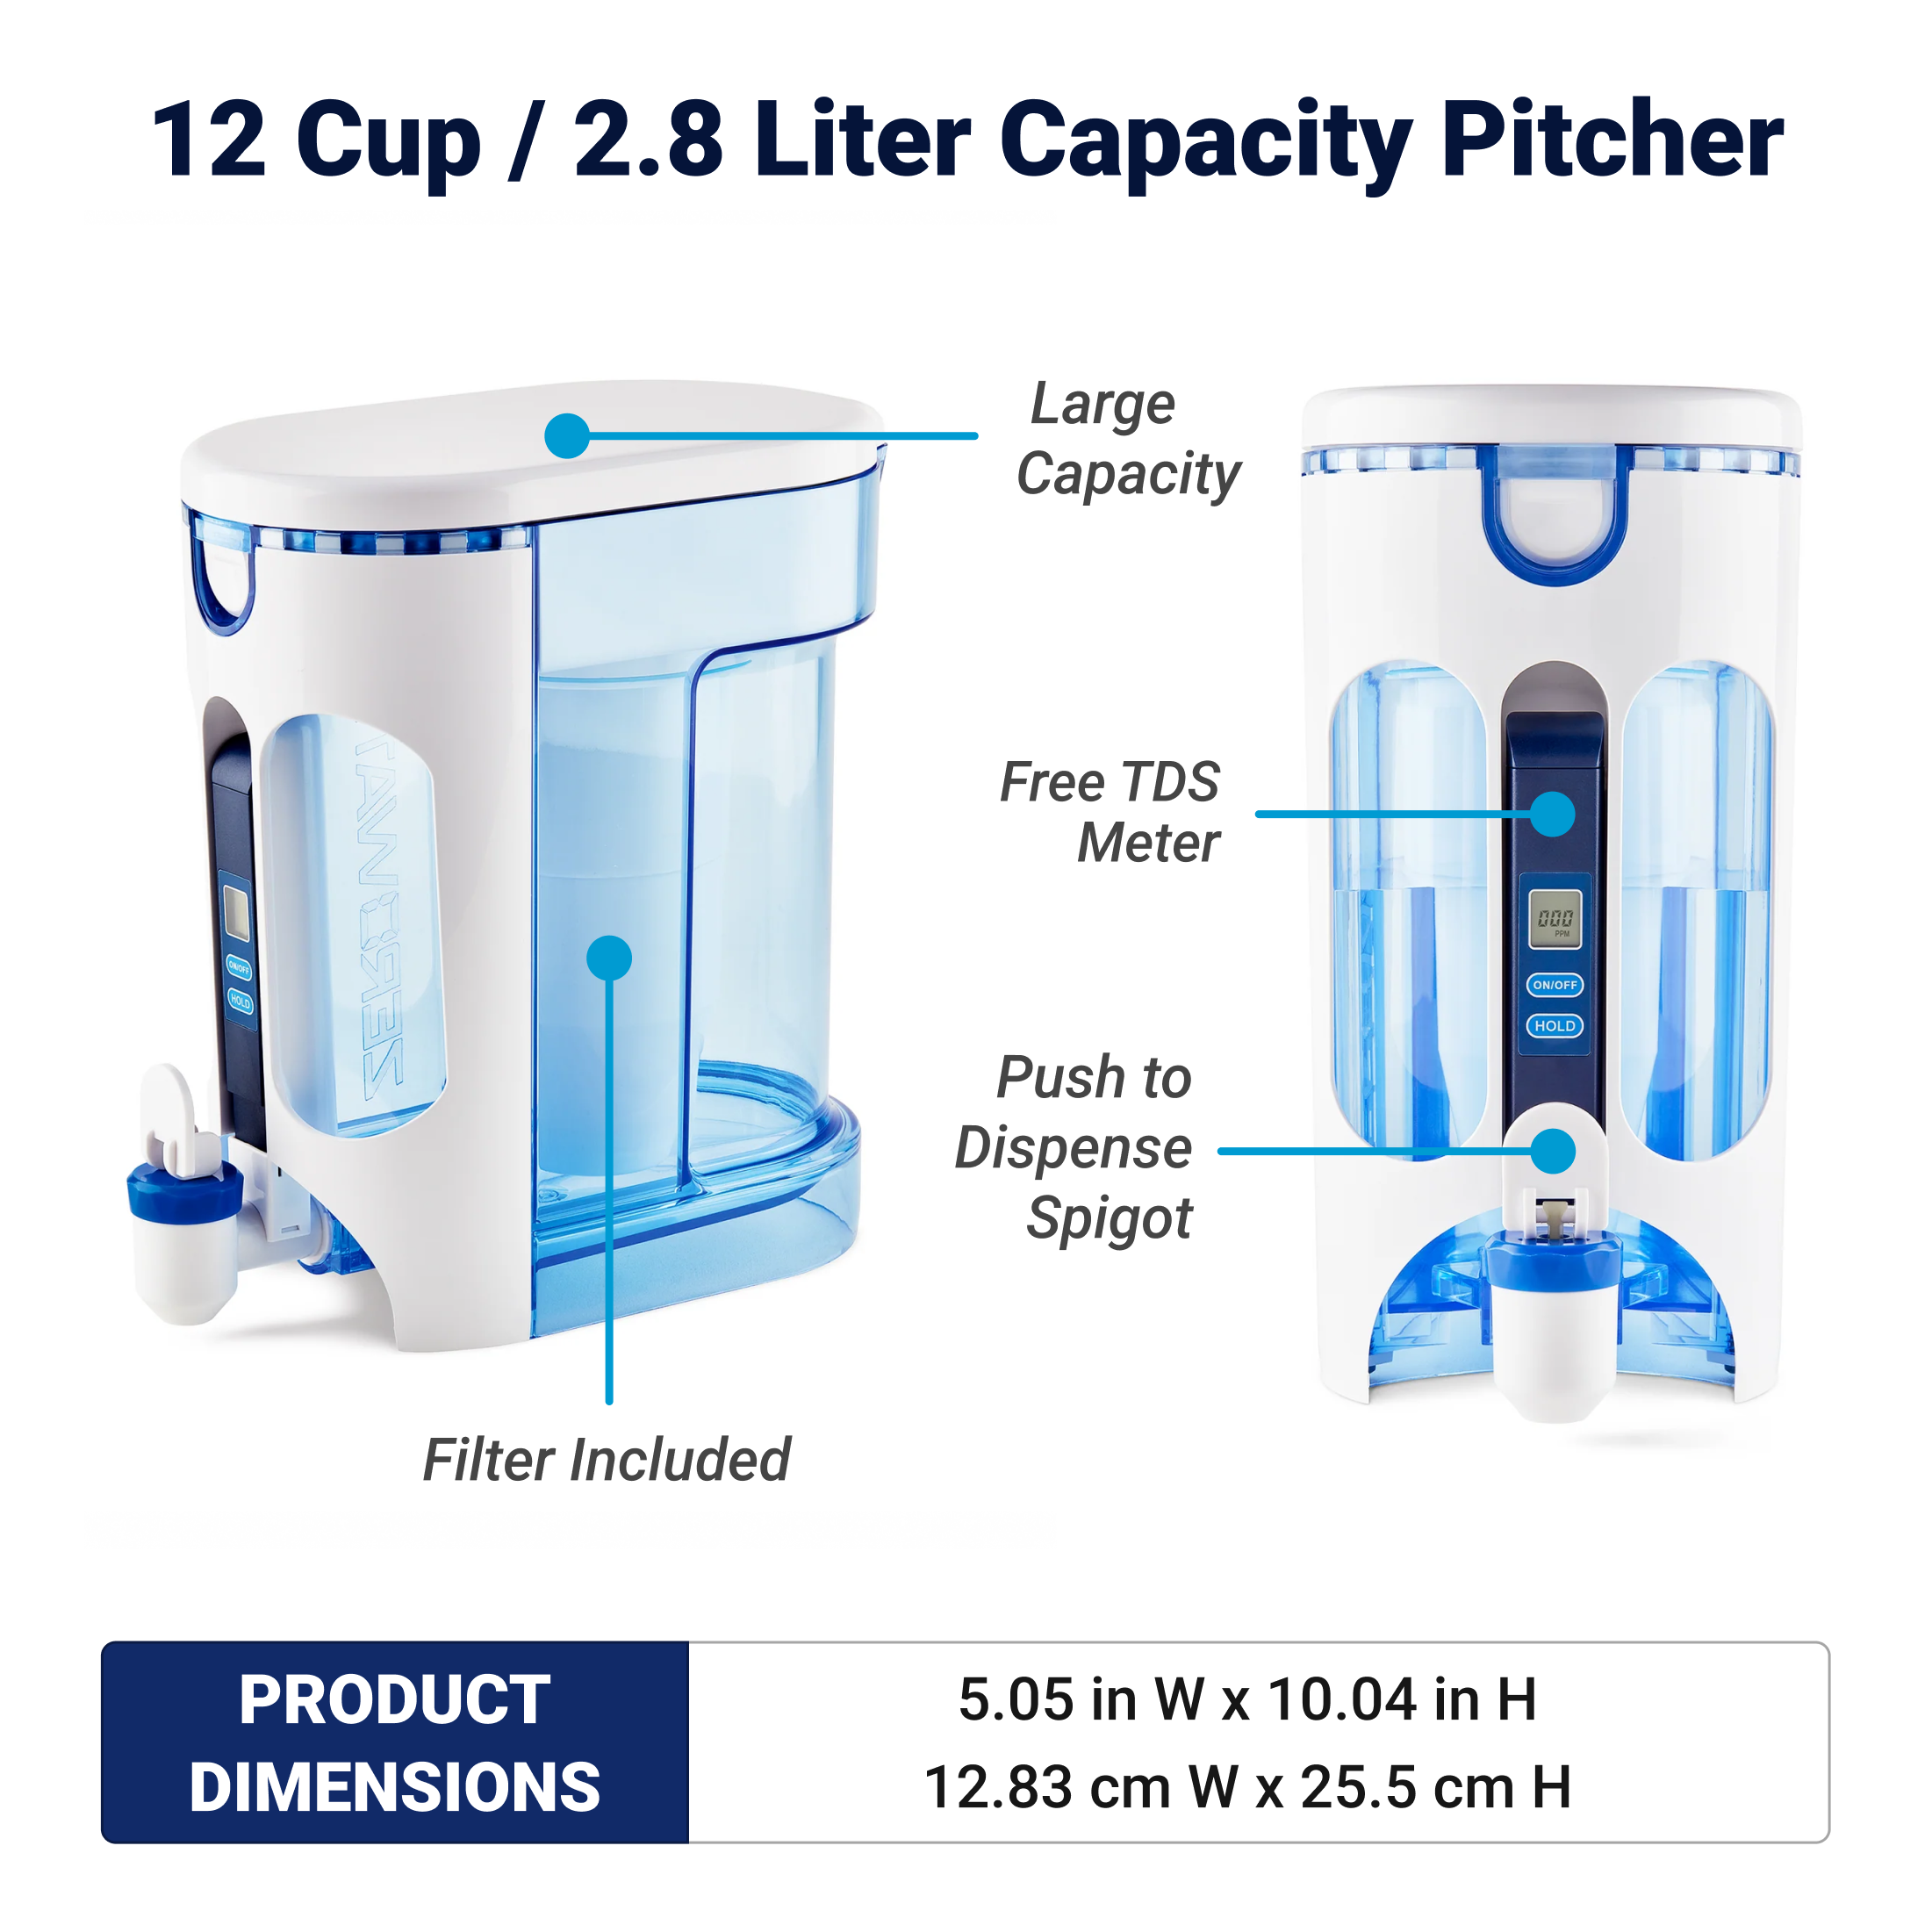 12 cup/2.8 liter capacity pitcher side and front view with dimensionsd